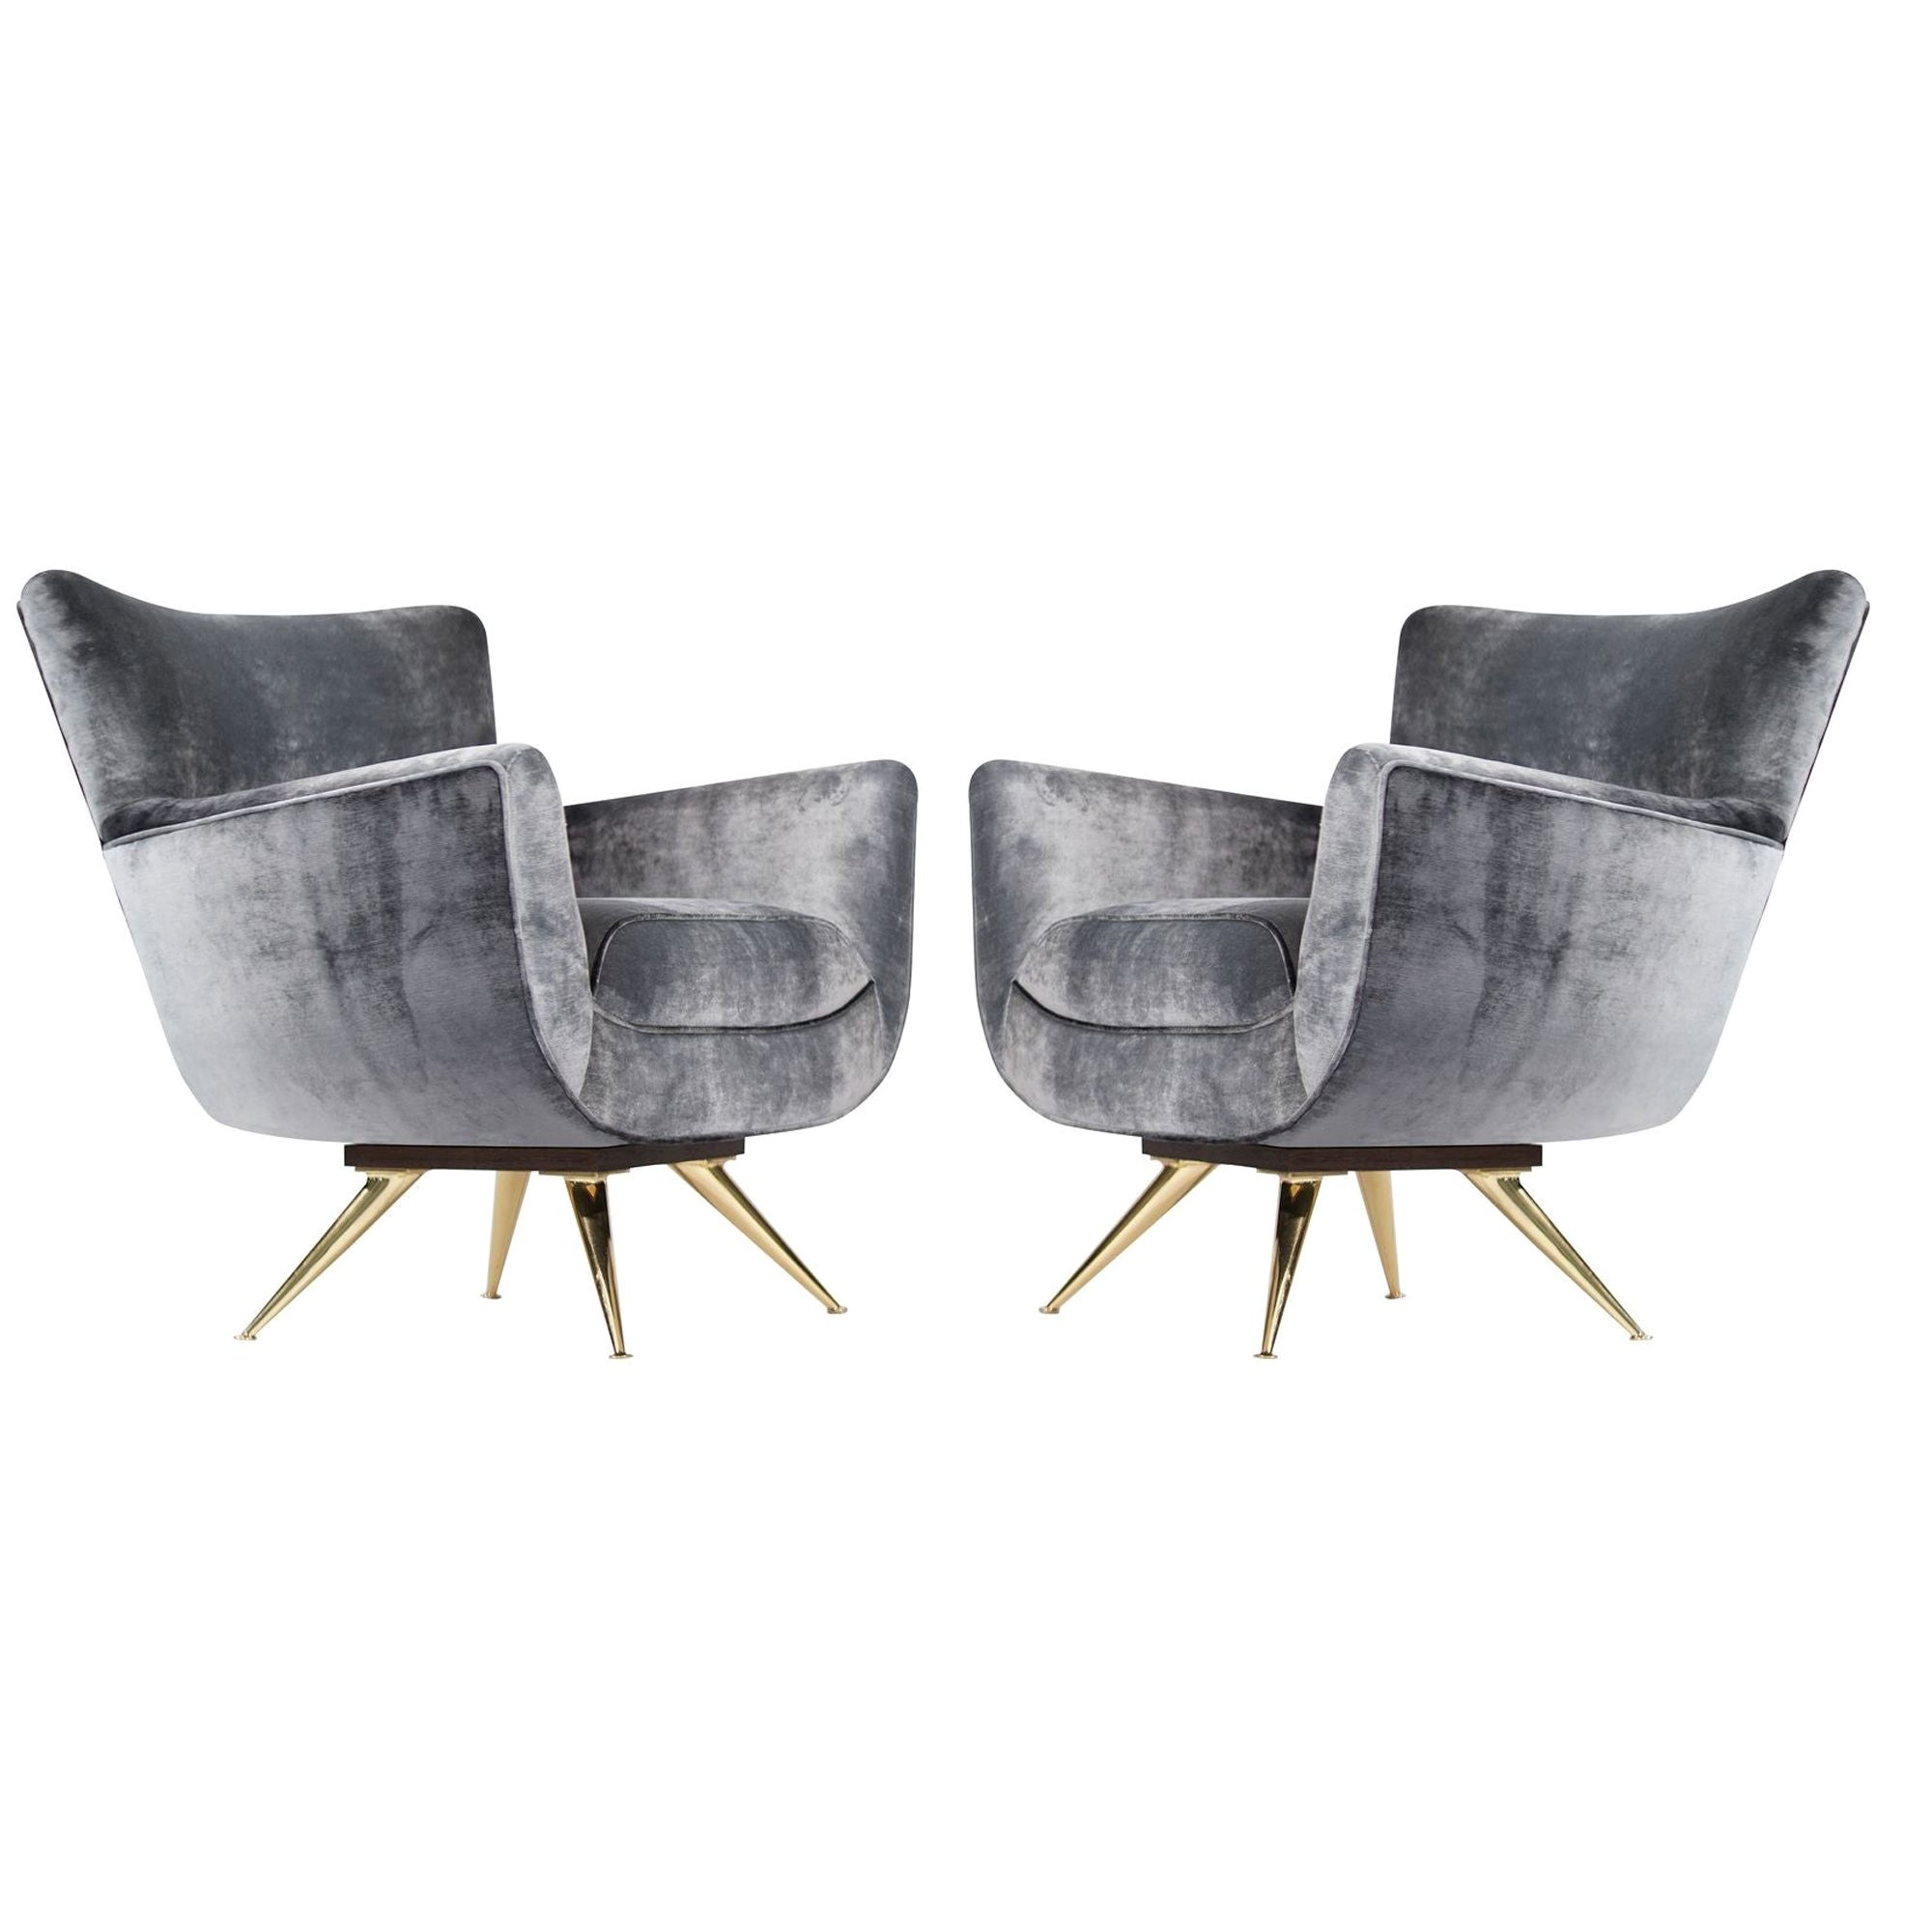 Henry Glass Swivel Chairs in Distressed Silver Velvet, C. 1950s For Sale